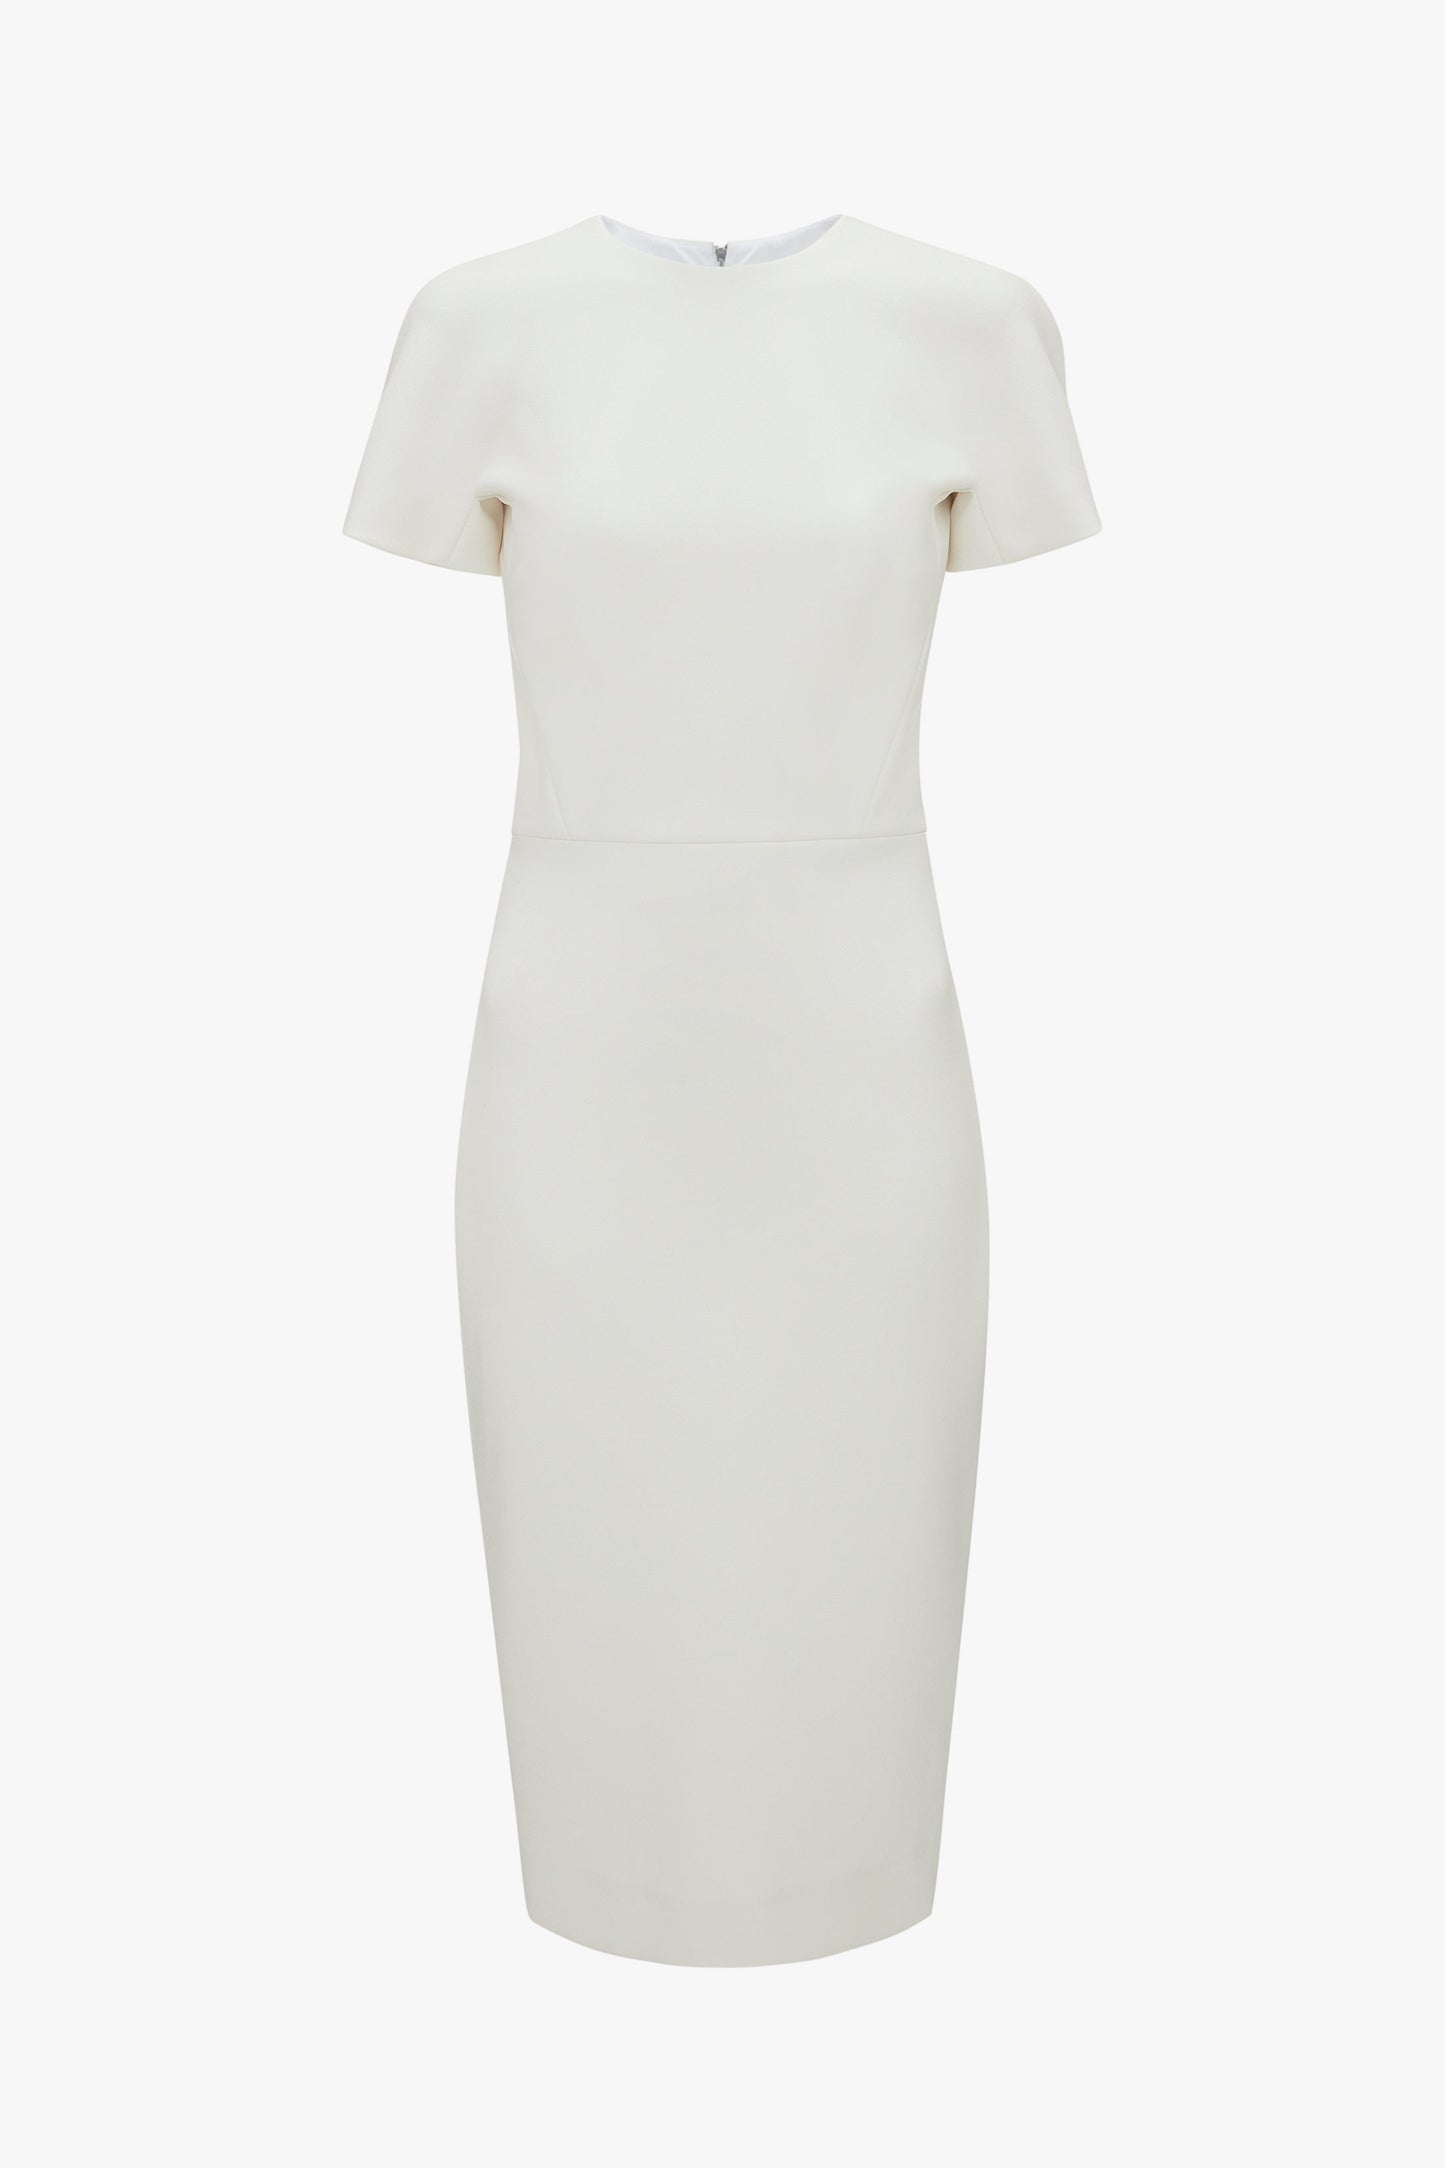 A plain ivory knee-length Victoria Beckham fitted T-shirt dress with short sleeves and a subtle boat neckline, displayed against a white background.